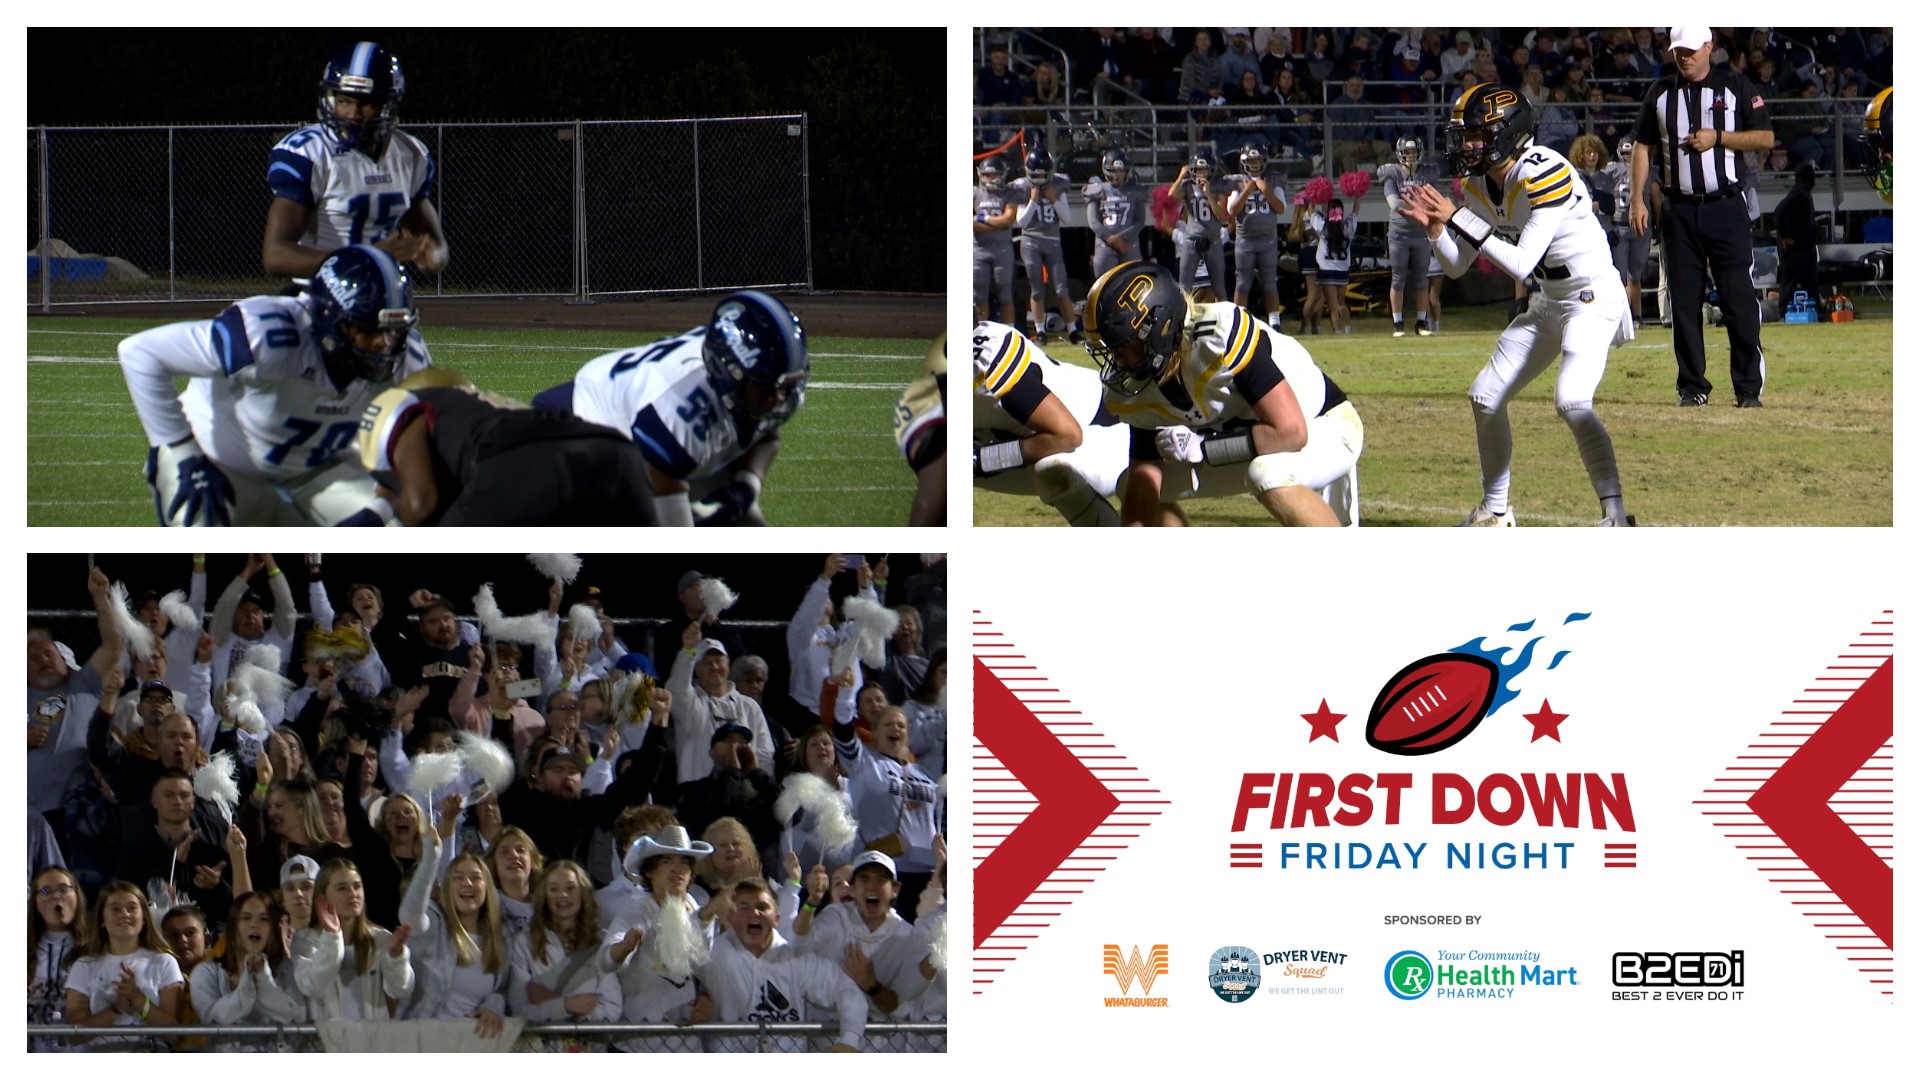 Region championships & playoff spots were on the line during week 9 of the AHSAA season. Check out scores & highlights on the new edition of First Down Friday Night